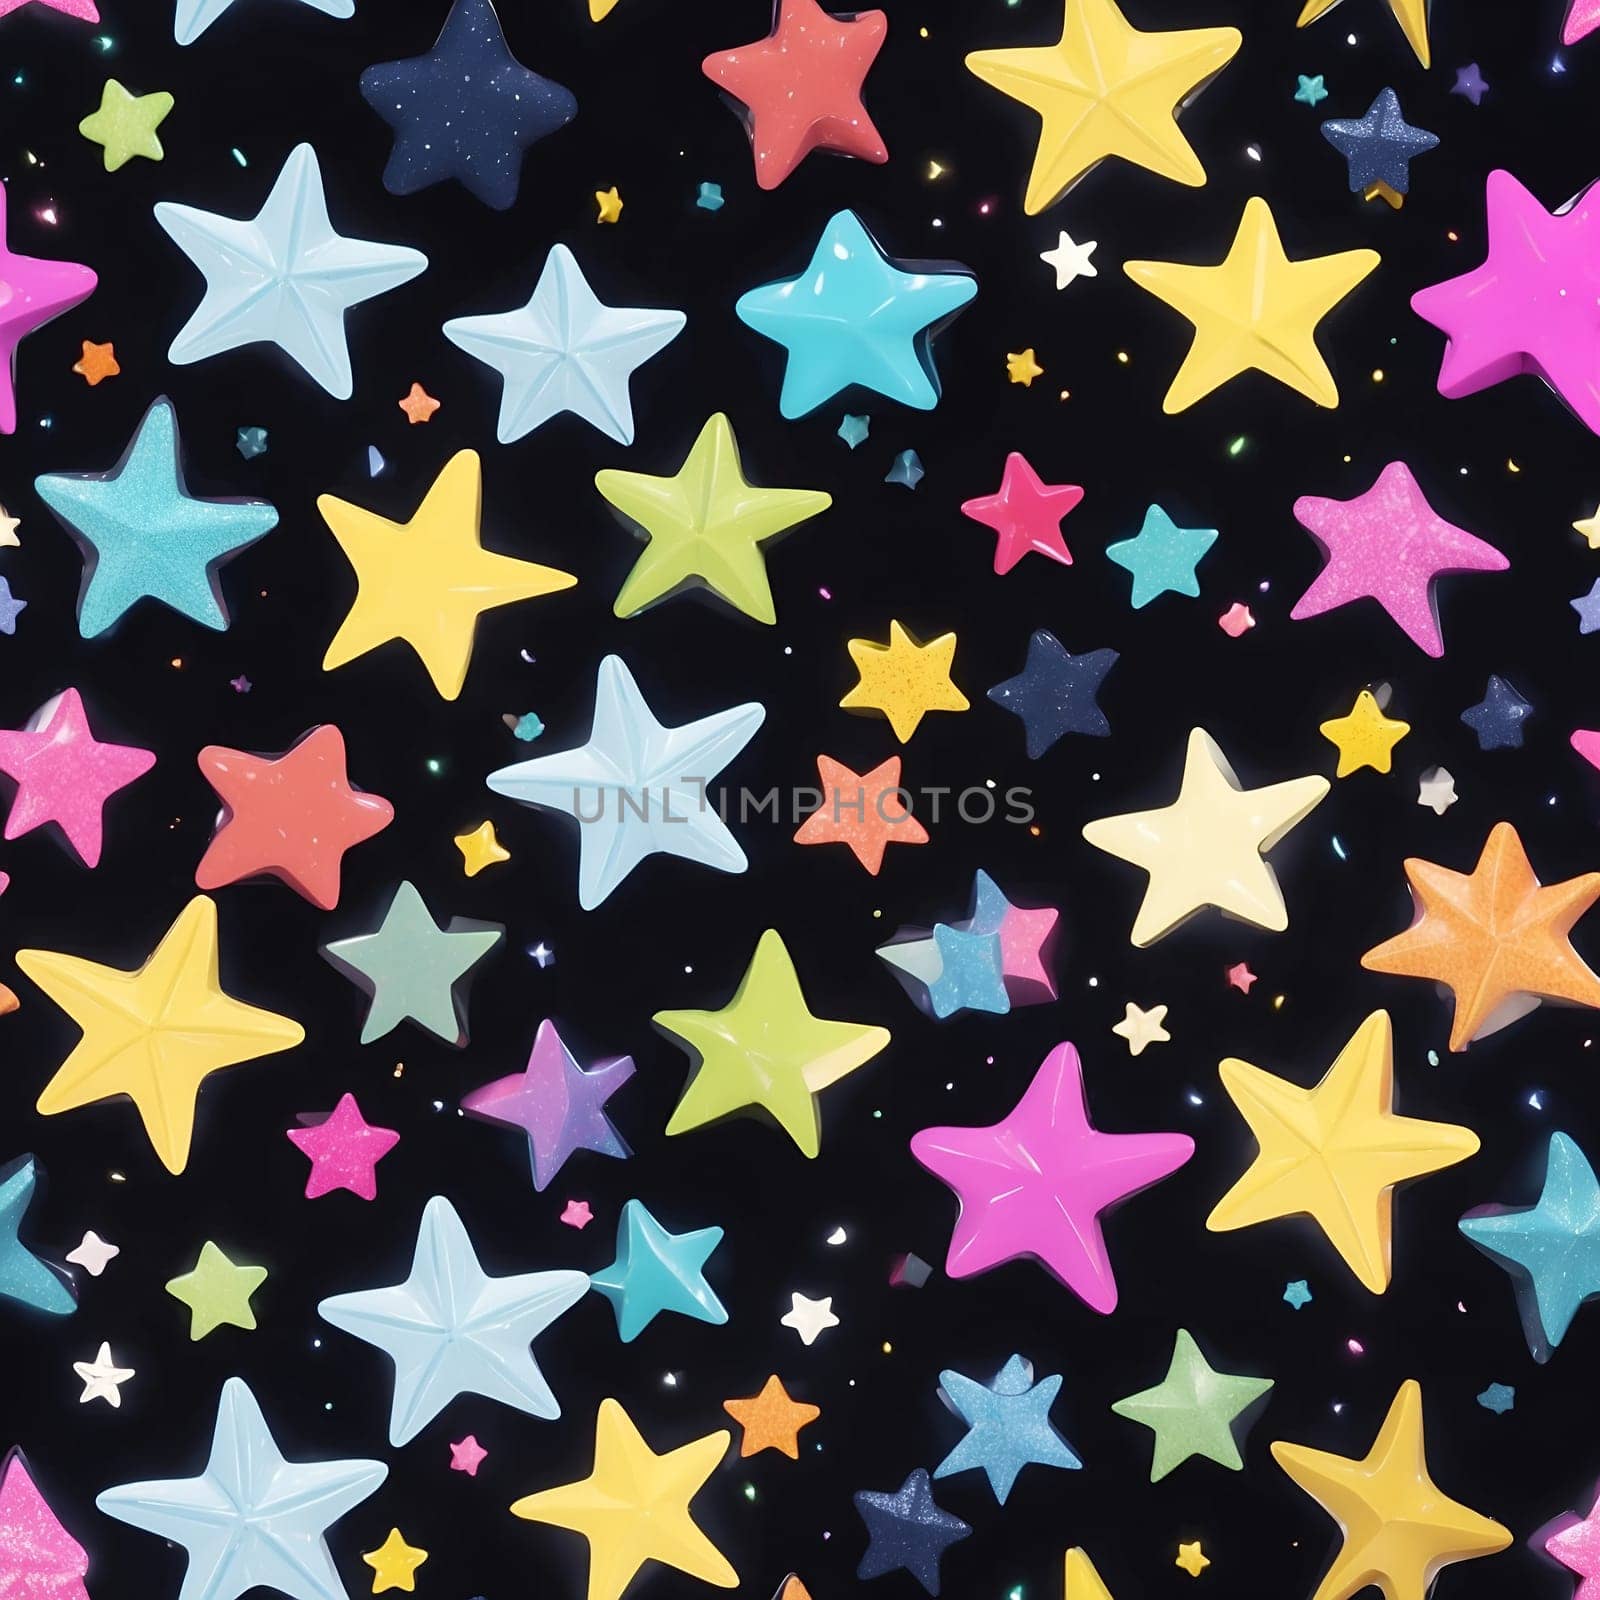 A seamless pattern featuring a multitude of stars that brightly shine against a dark black backdrop.